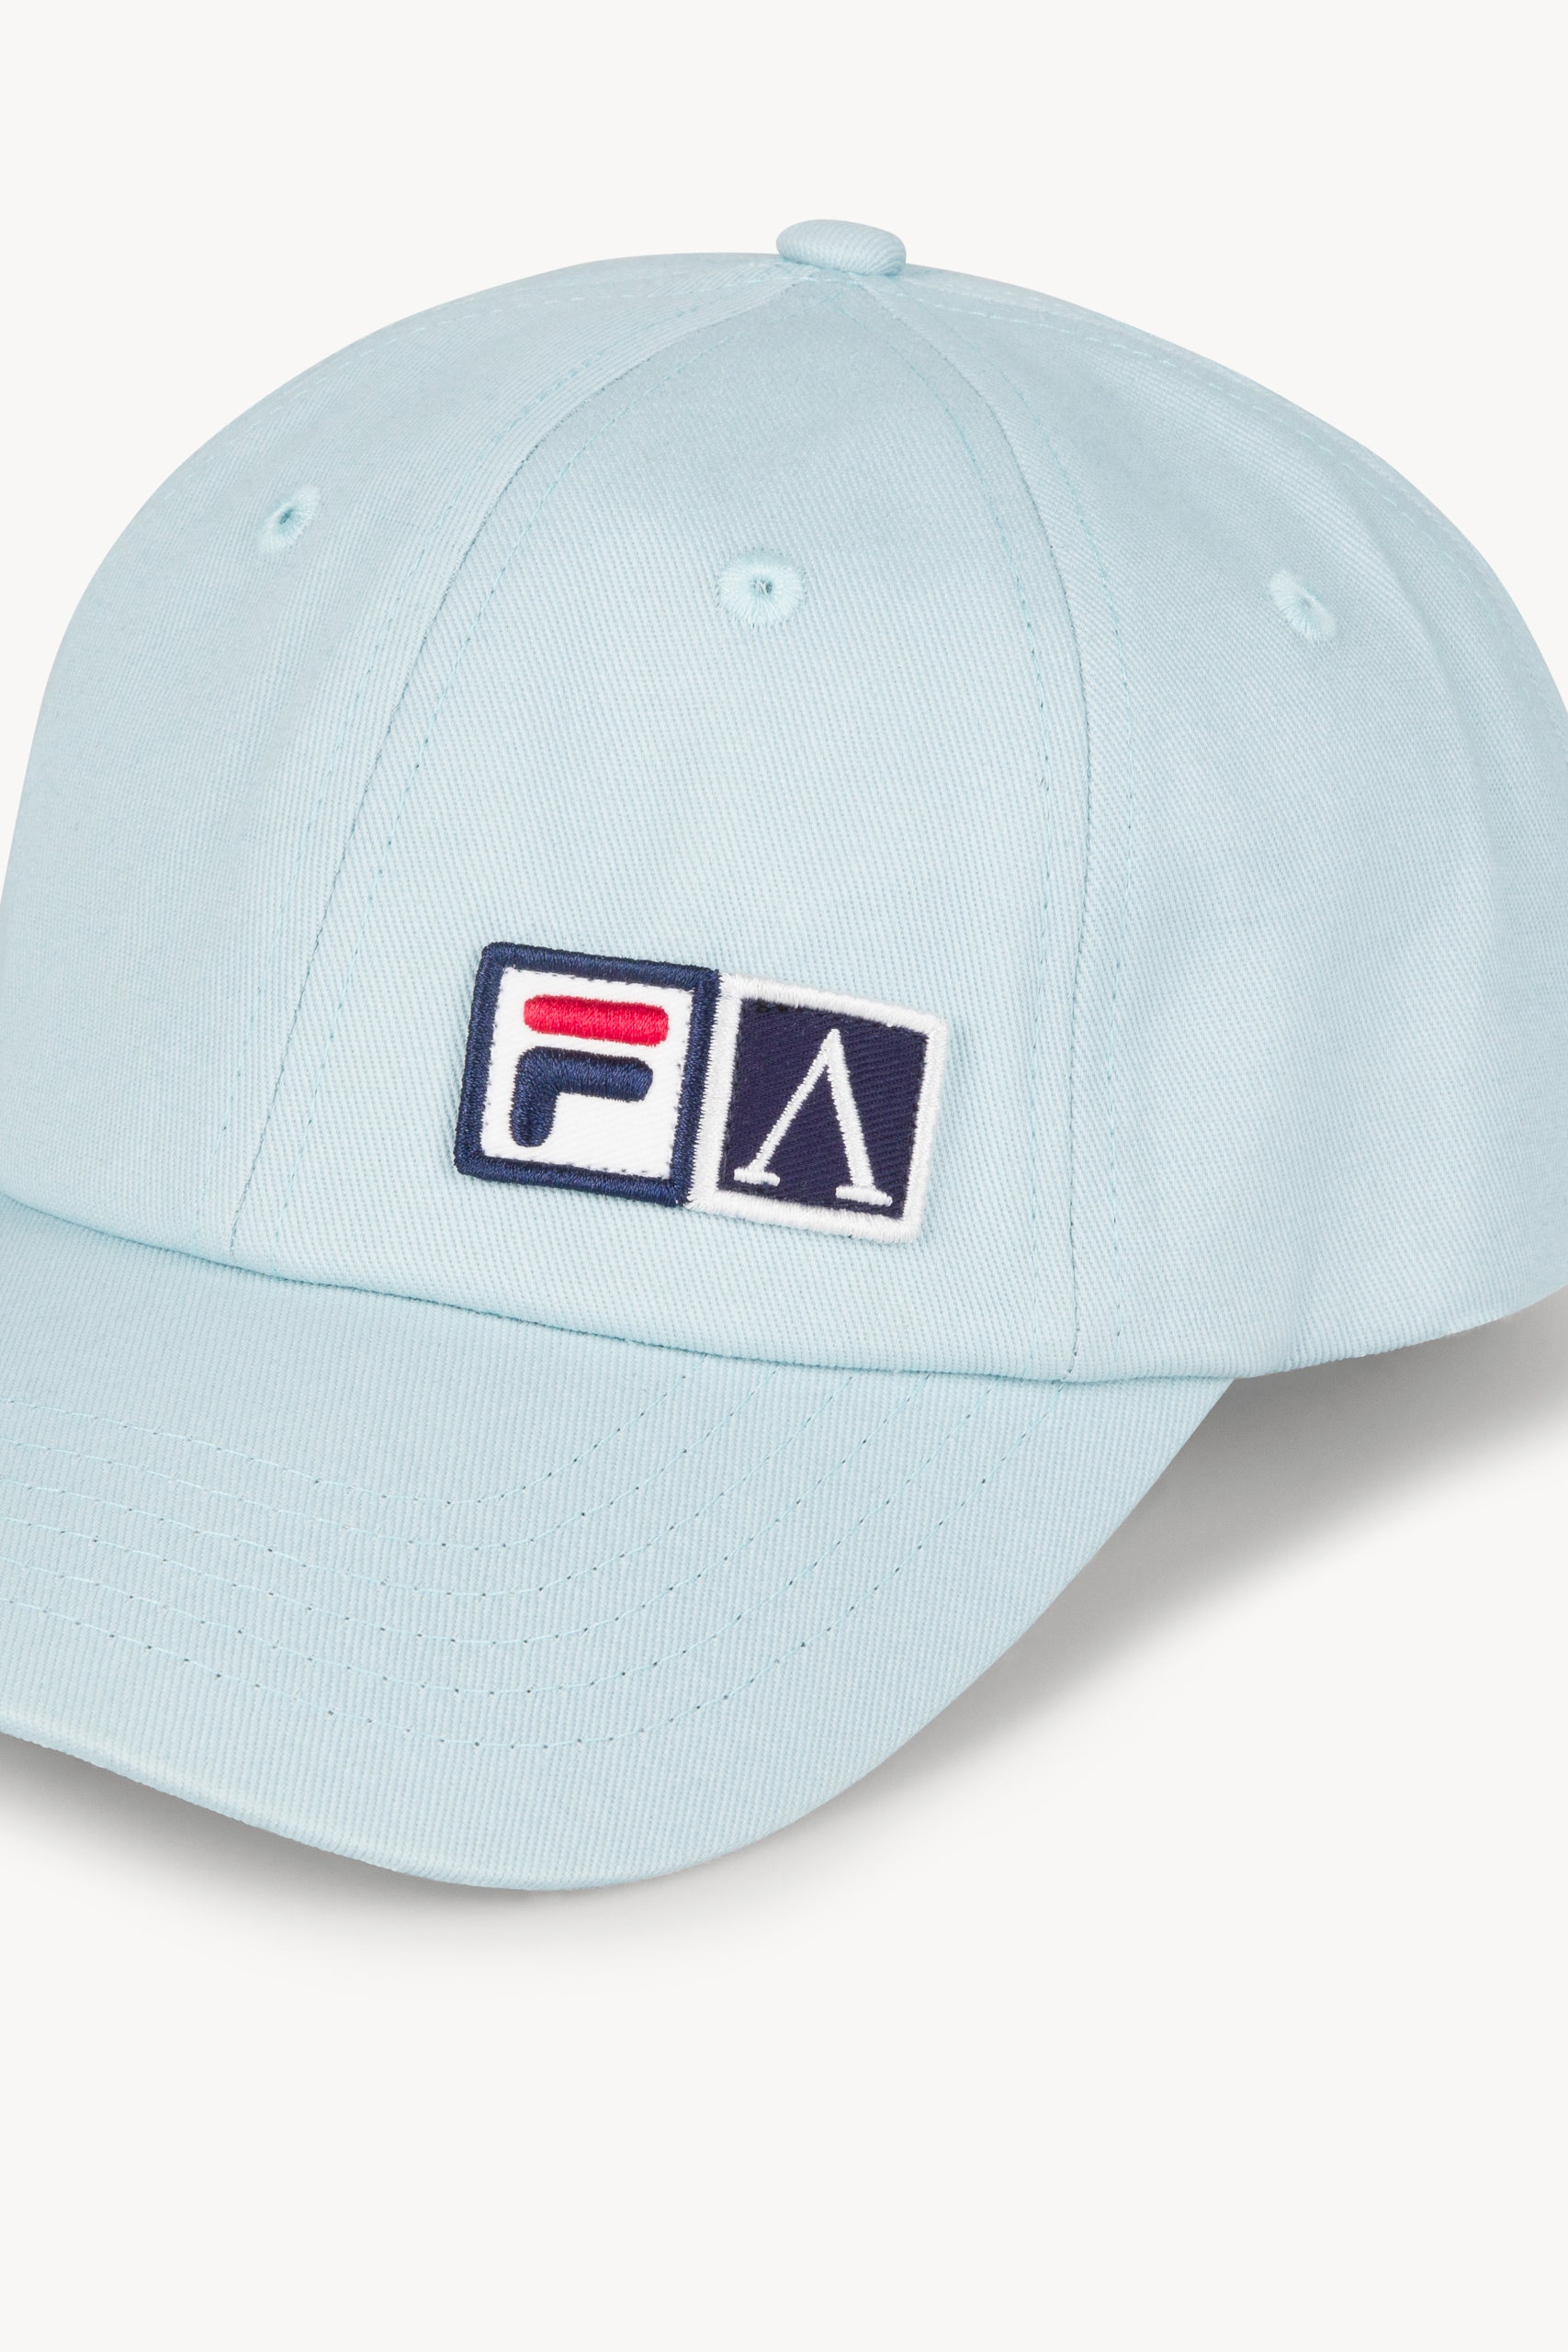 Load image into Gallery viewer, Aries x FILA Cap